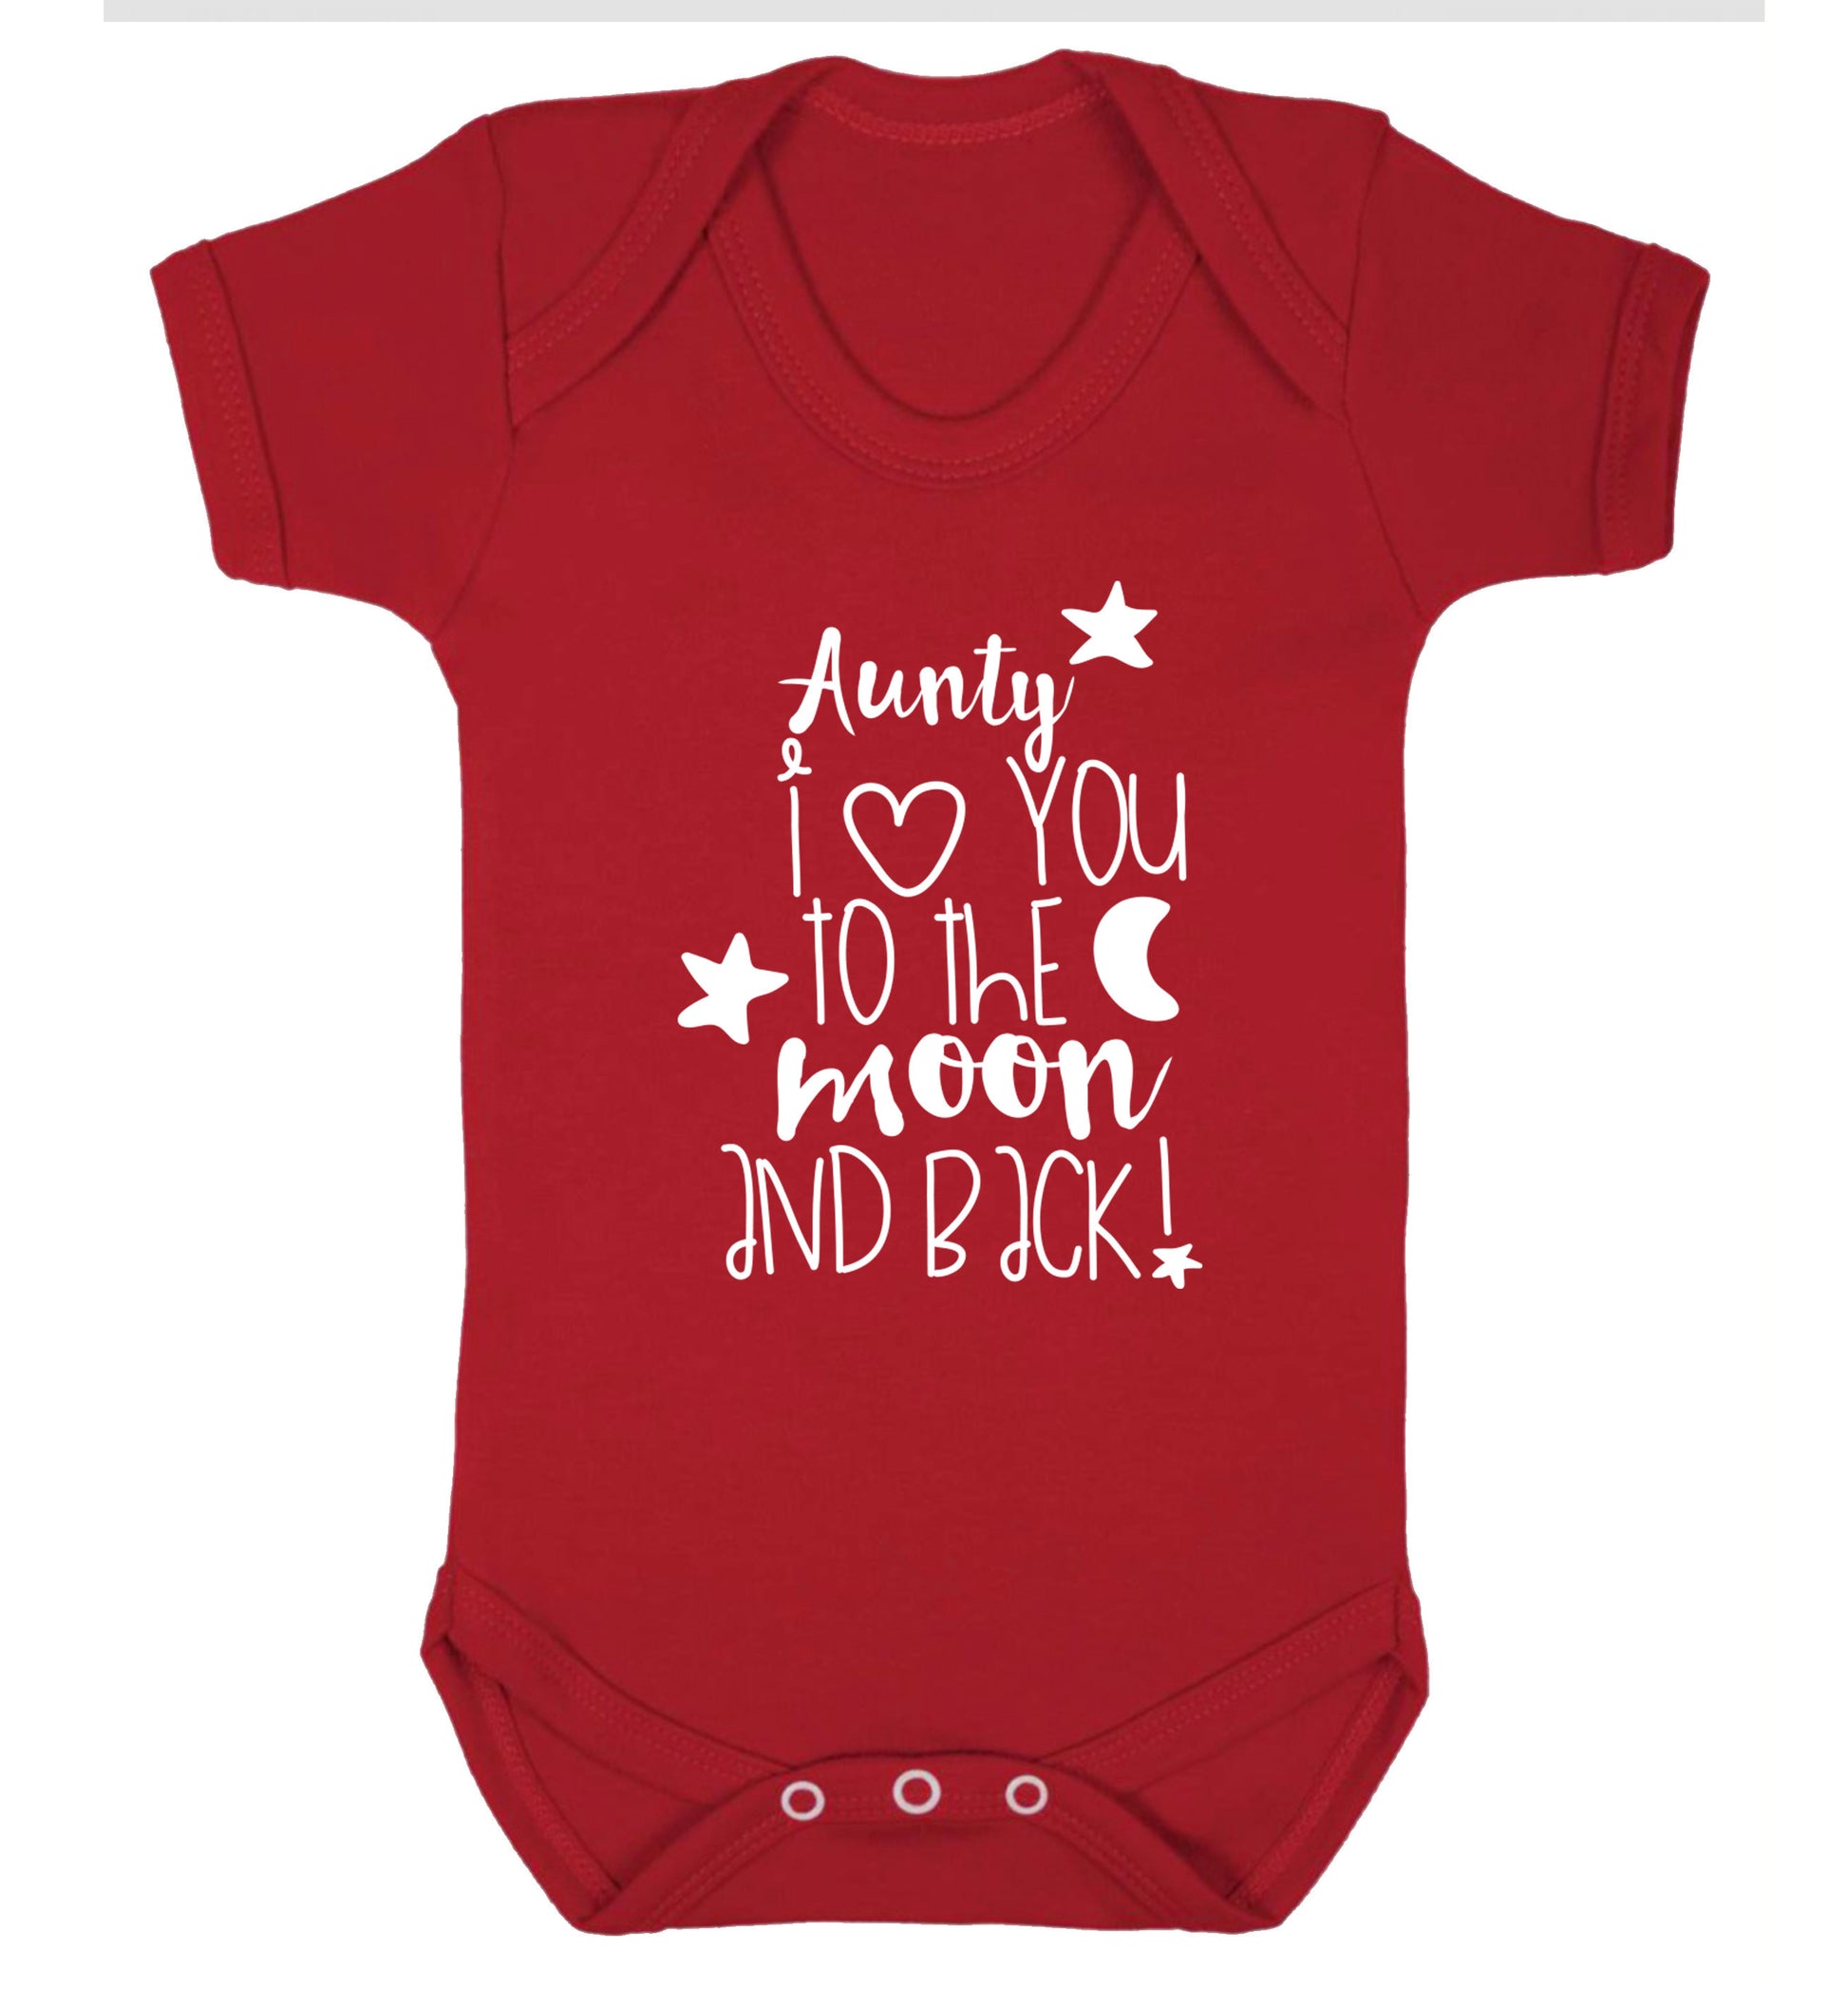 Aunty I love you to the moon and back Baby Vest red 18-24 months